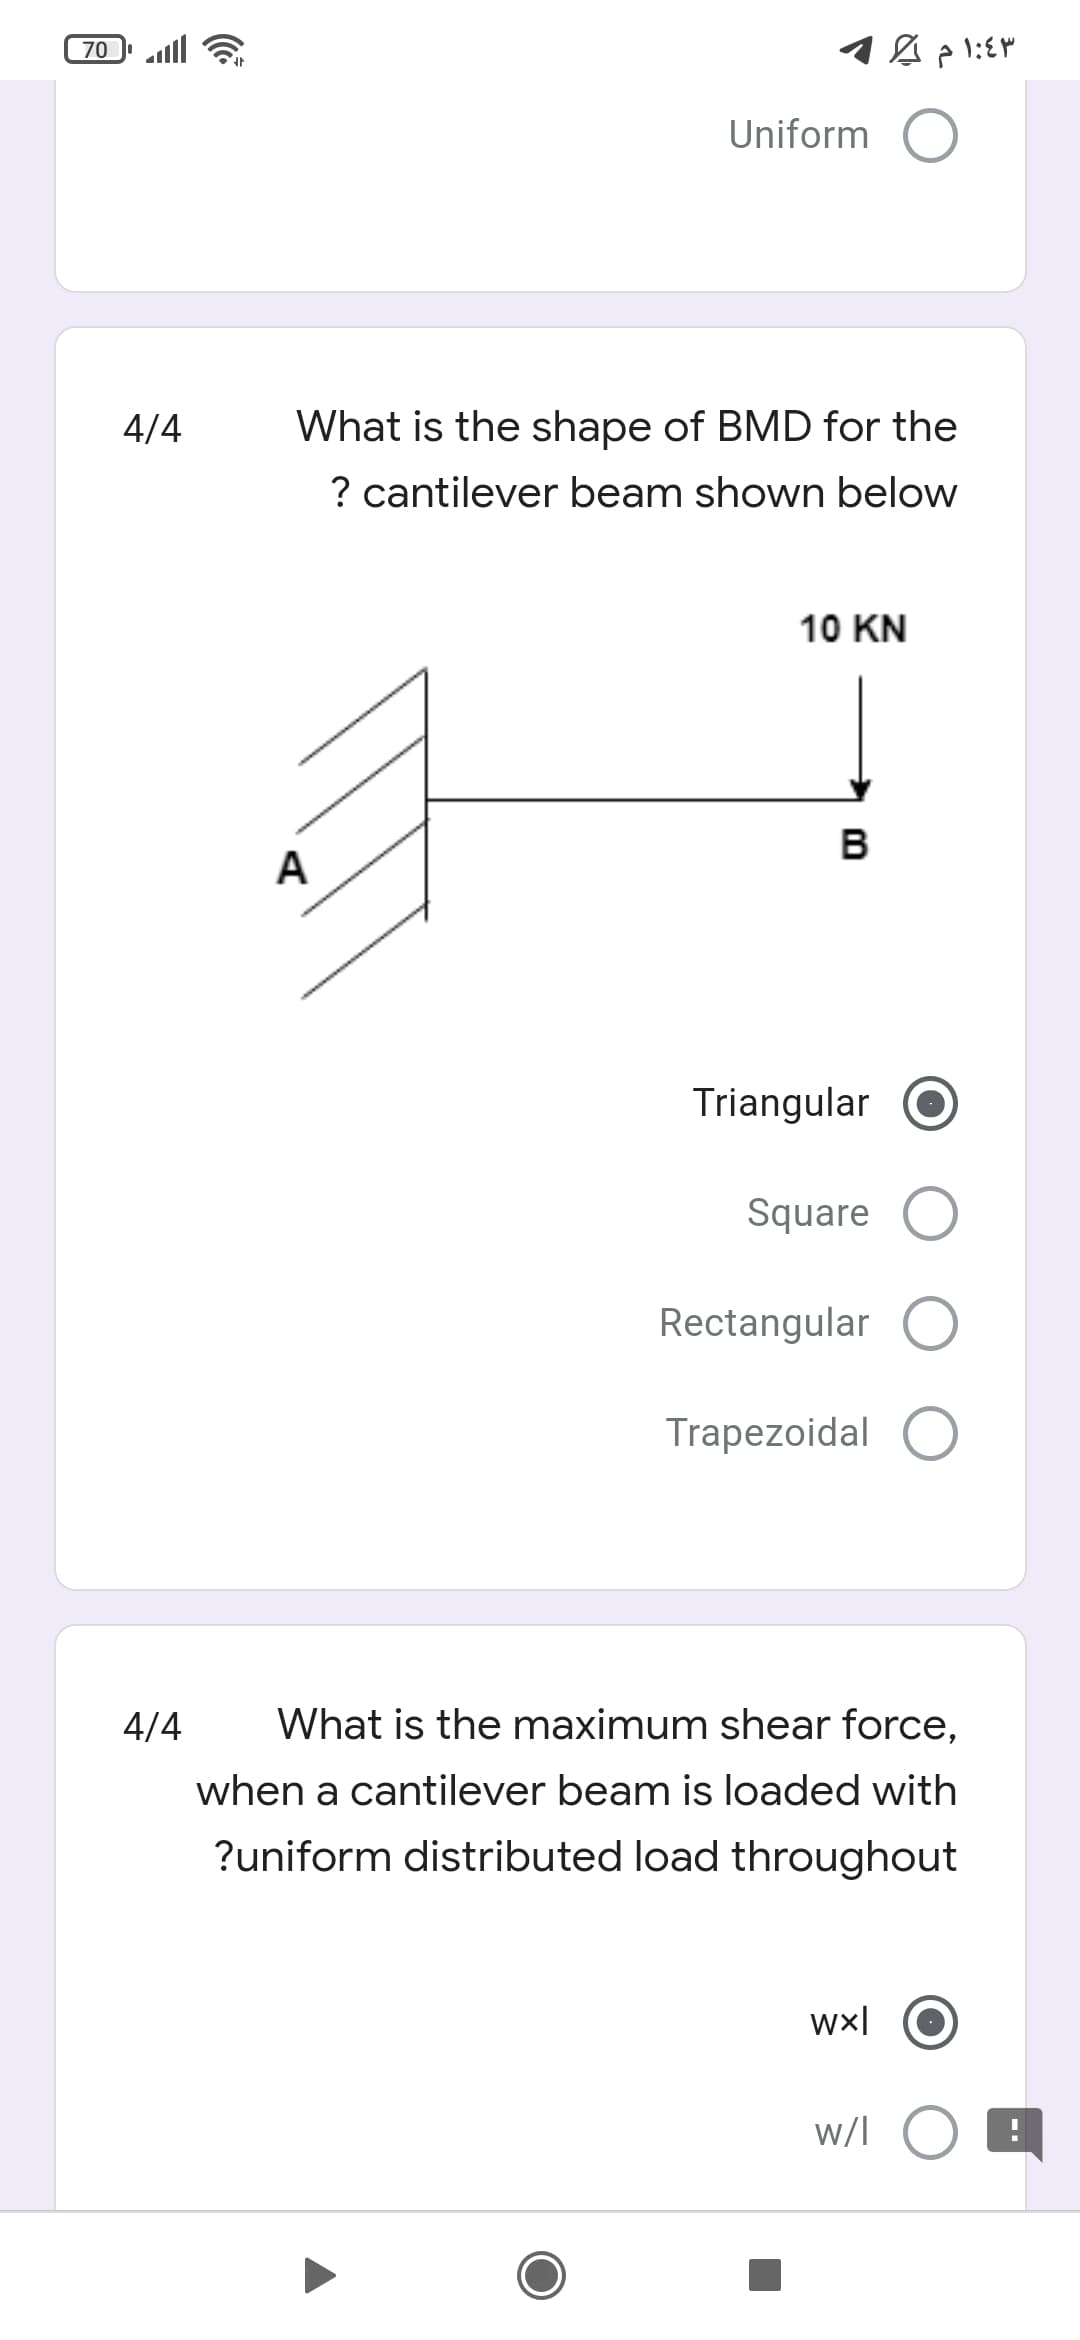 70
Uniform O
4/4
What is the shape of BMD for the
? cantilever beam shown below
10 KN
в
A
Triangular
Square O
Rectangular
Trapezoidal O
4/4
What is the maximum shear force,
when a cantilever beam is loaded with
?uniform distributed load throughout
wx|
w/l O
